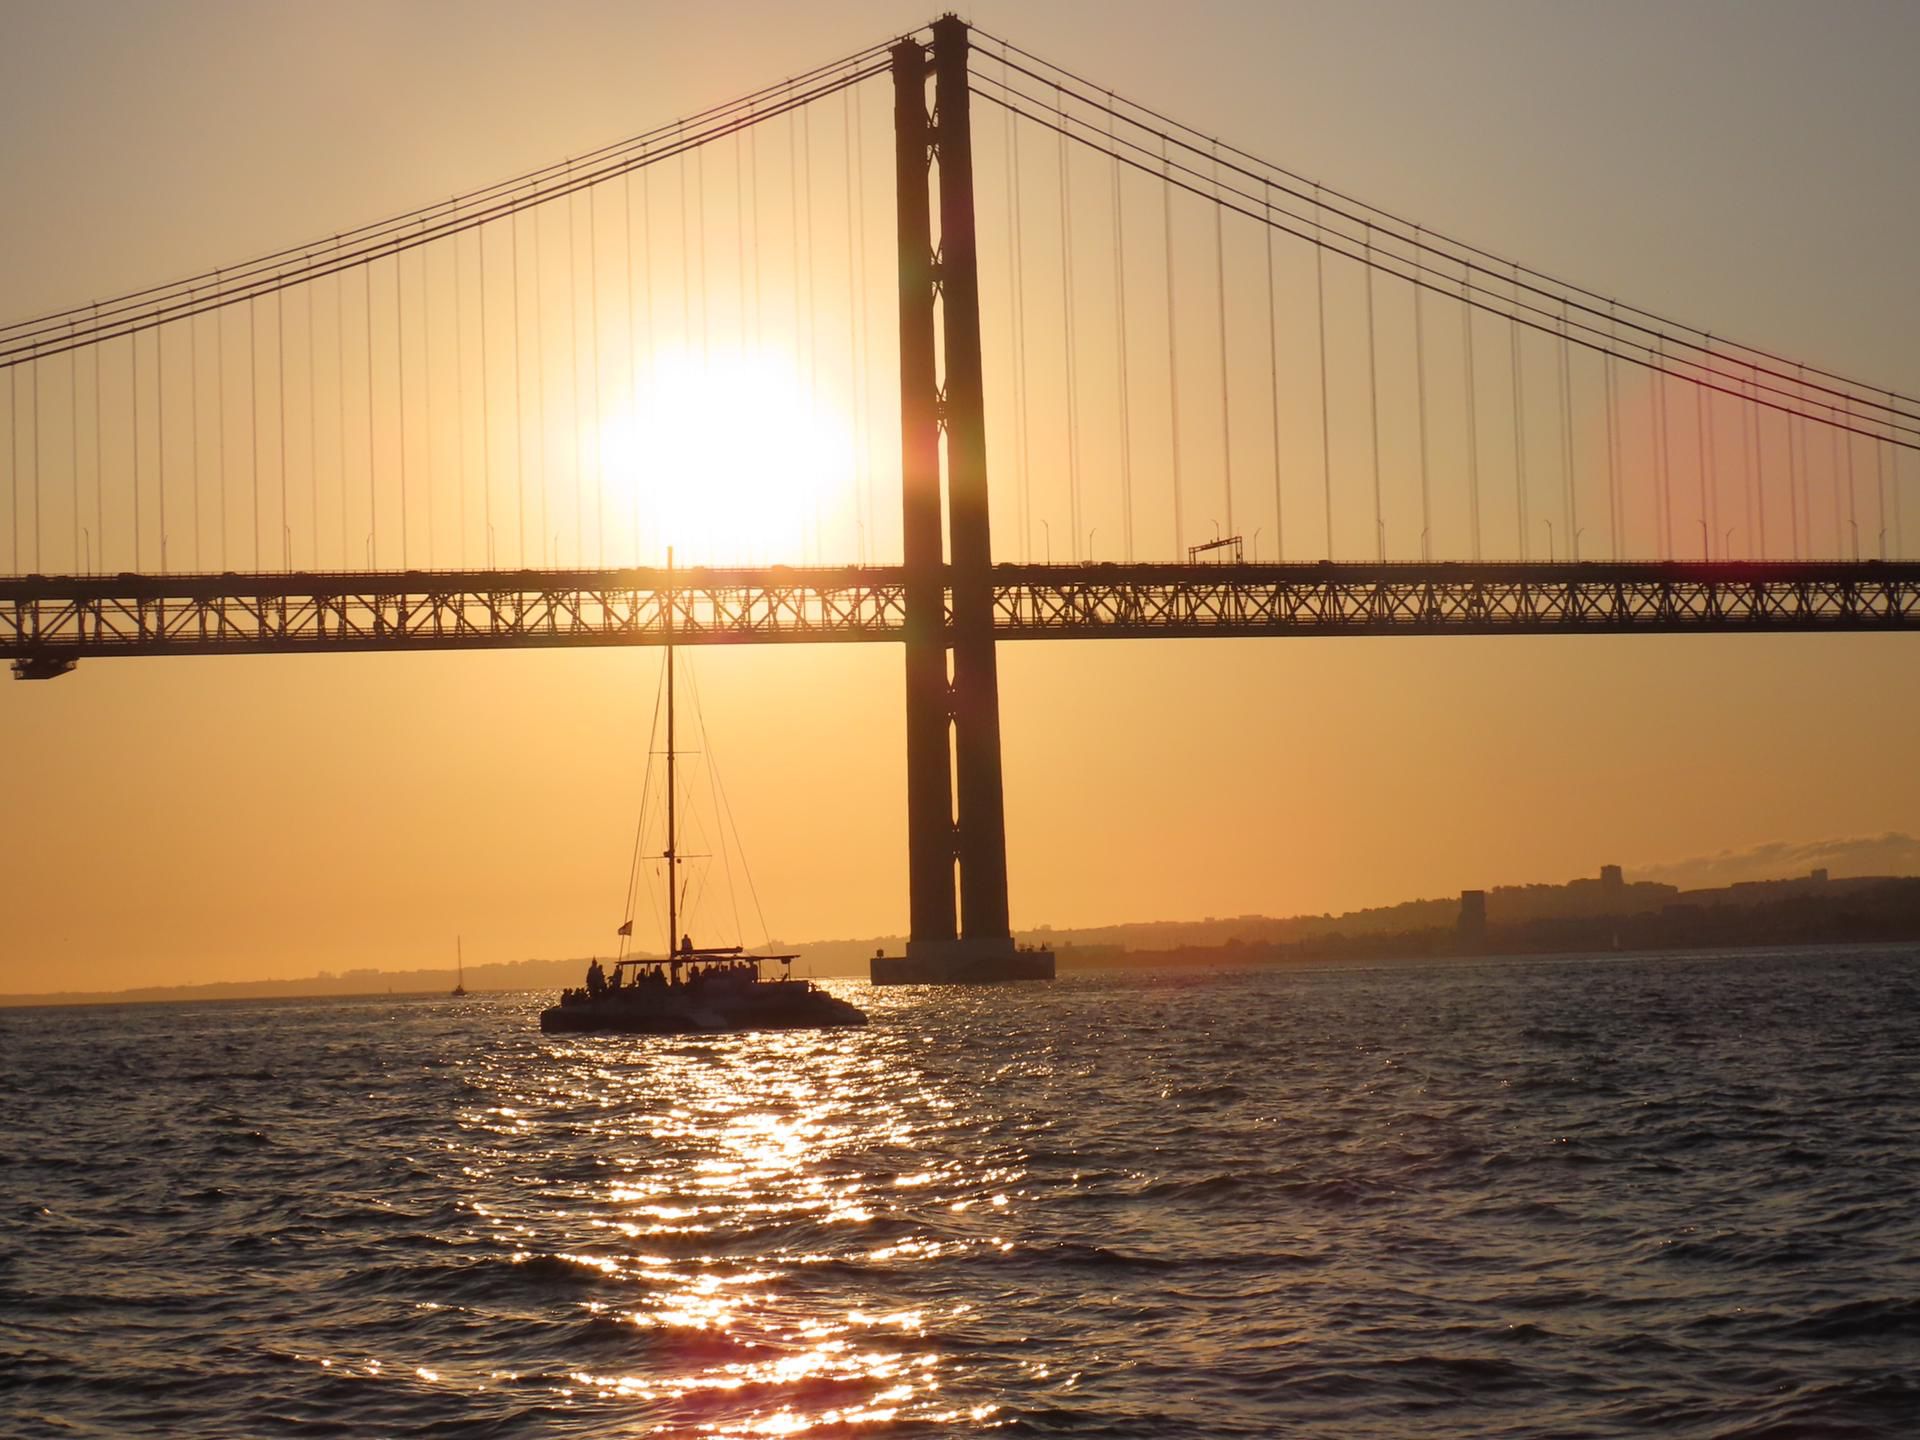 Boat trip on the Tagus river Lisbon
